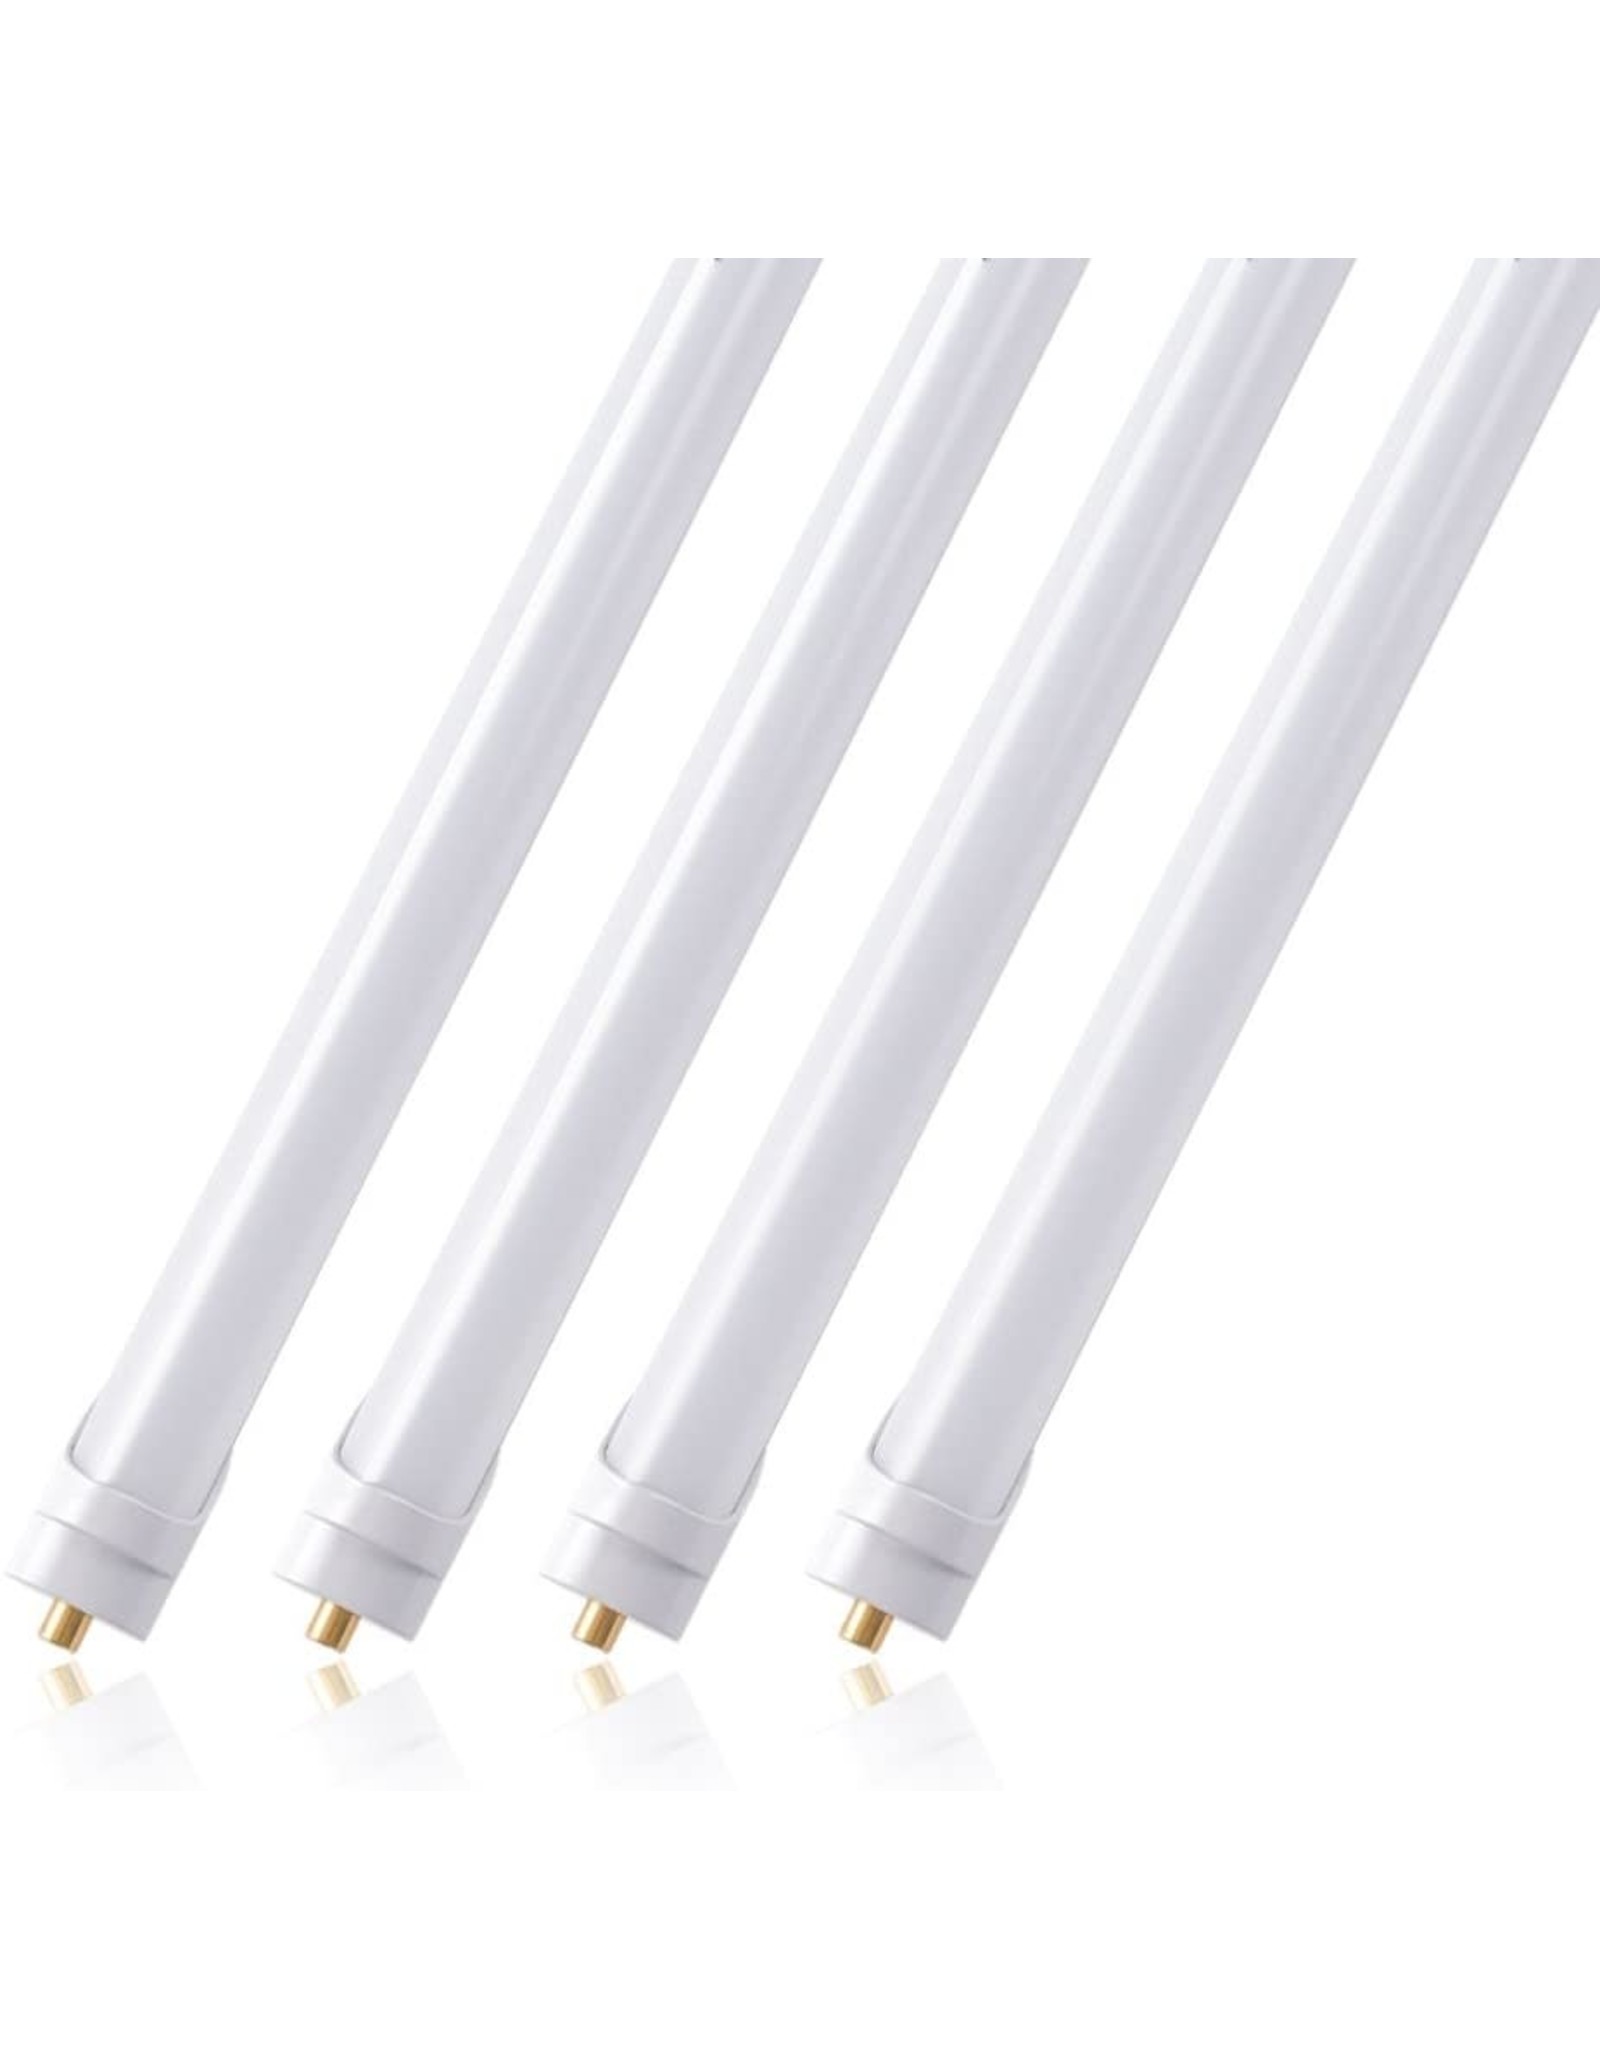 Barrina (Pack of 4) Barrina T8 T10 T12 LED Light Tube, 8ft, 44W (100W Equivalent), 6500K, 4500 Lumens, Frosted Cover, Dual-Ended Power, Fluorescent Light Bulbs Replacement